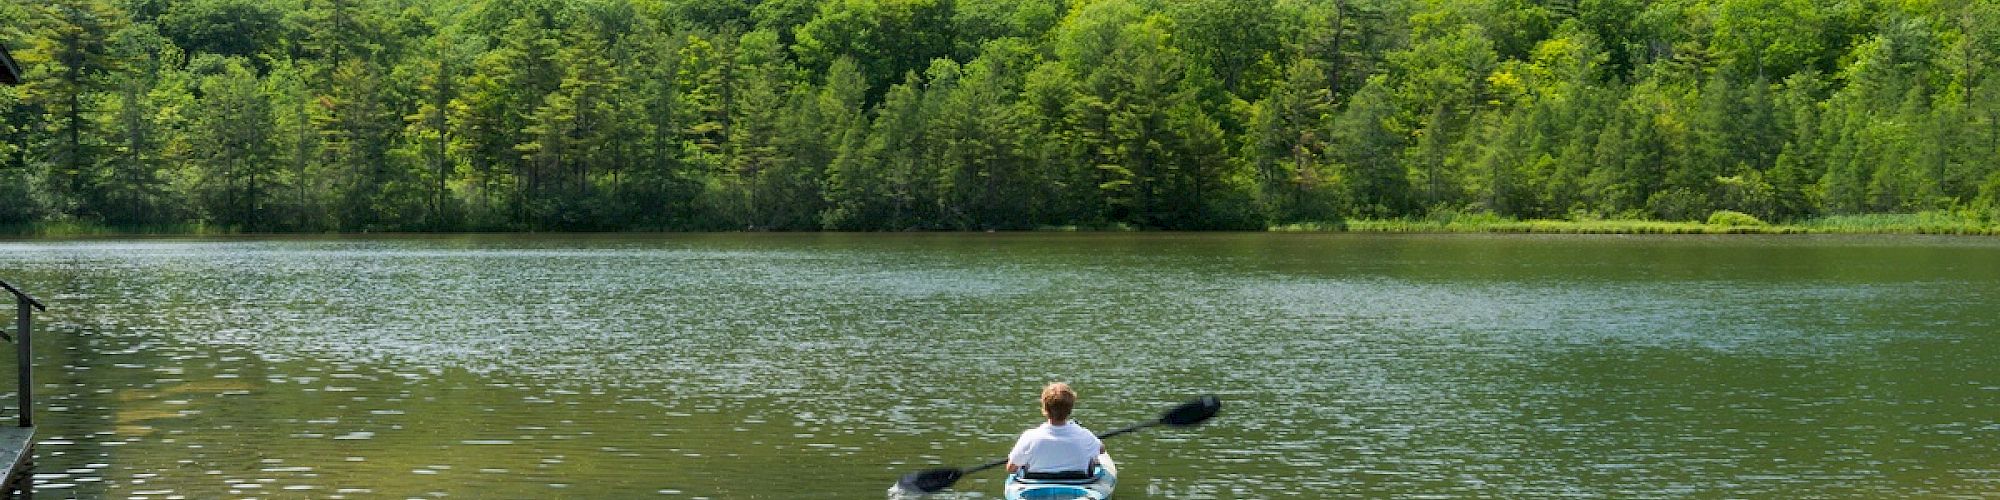 A person is kayaking on a calm lake surrounded by lush green mountains and trees under a partly cloudy sky.